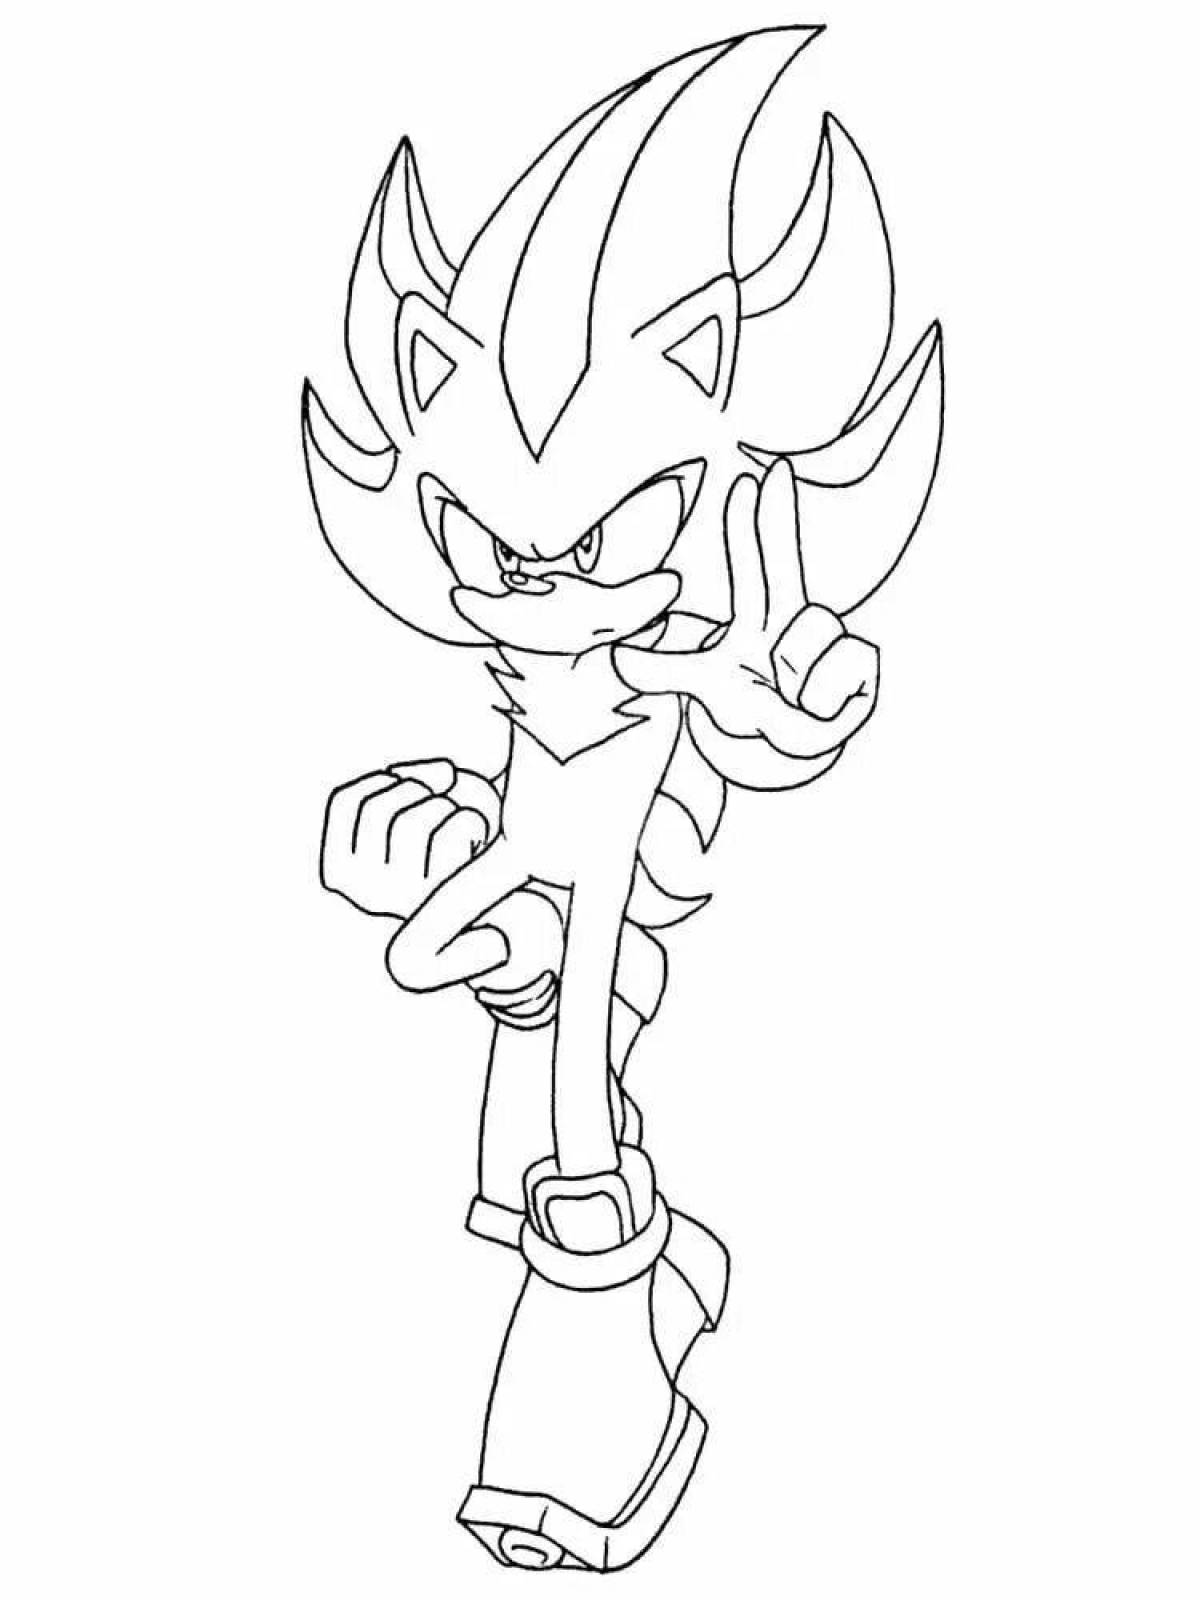 Exciting shadow hedgehog coloring book